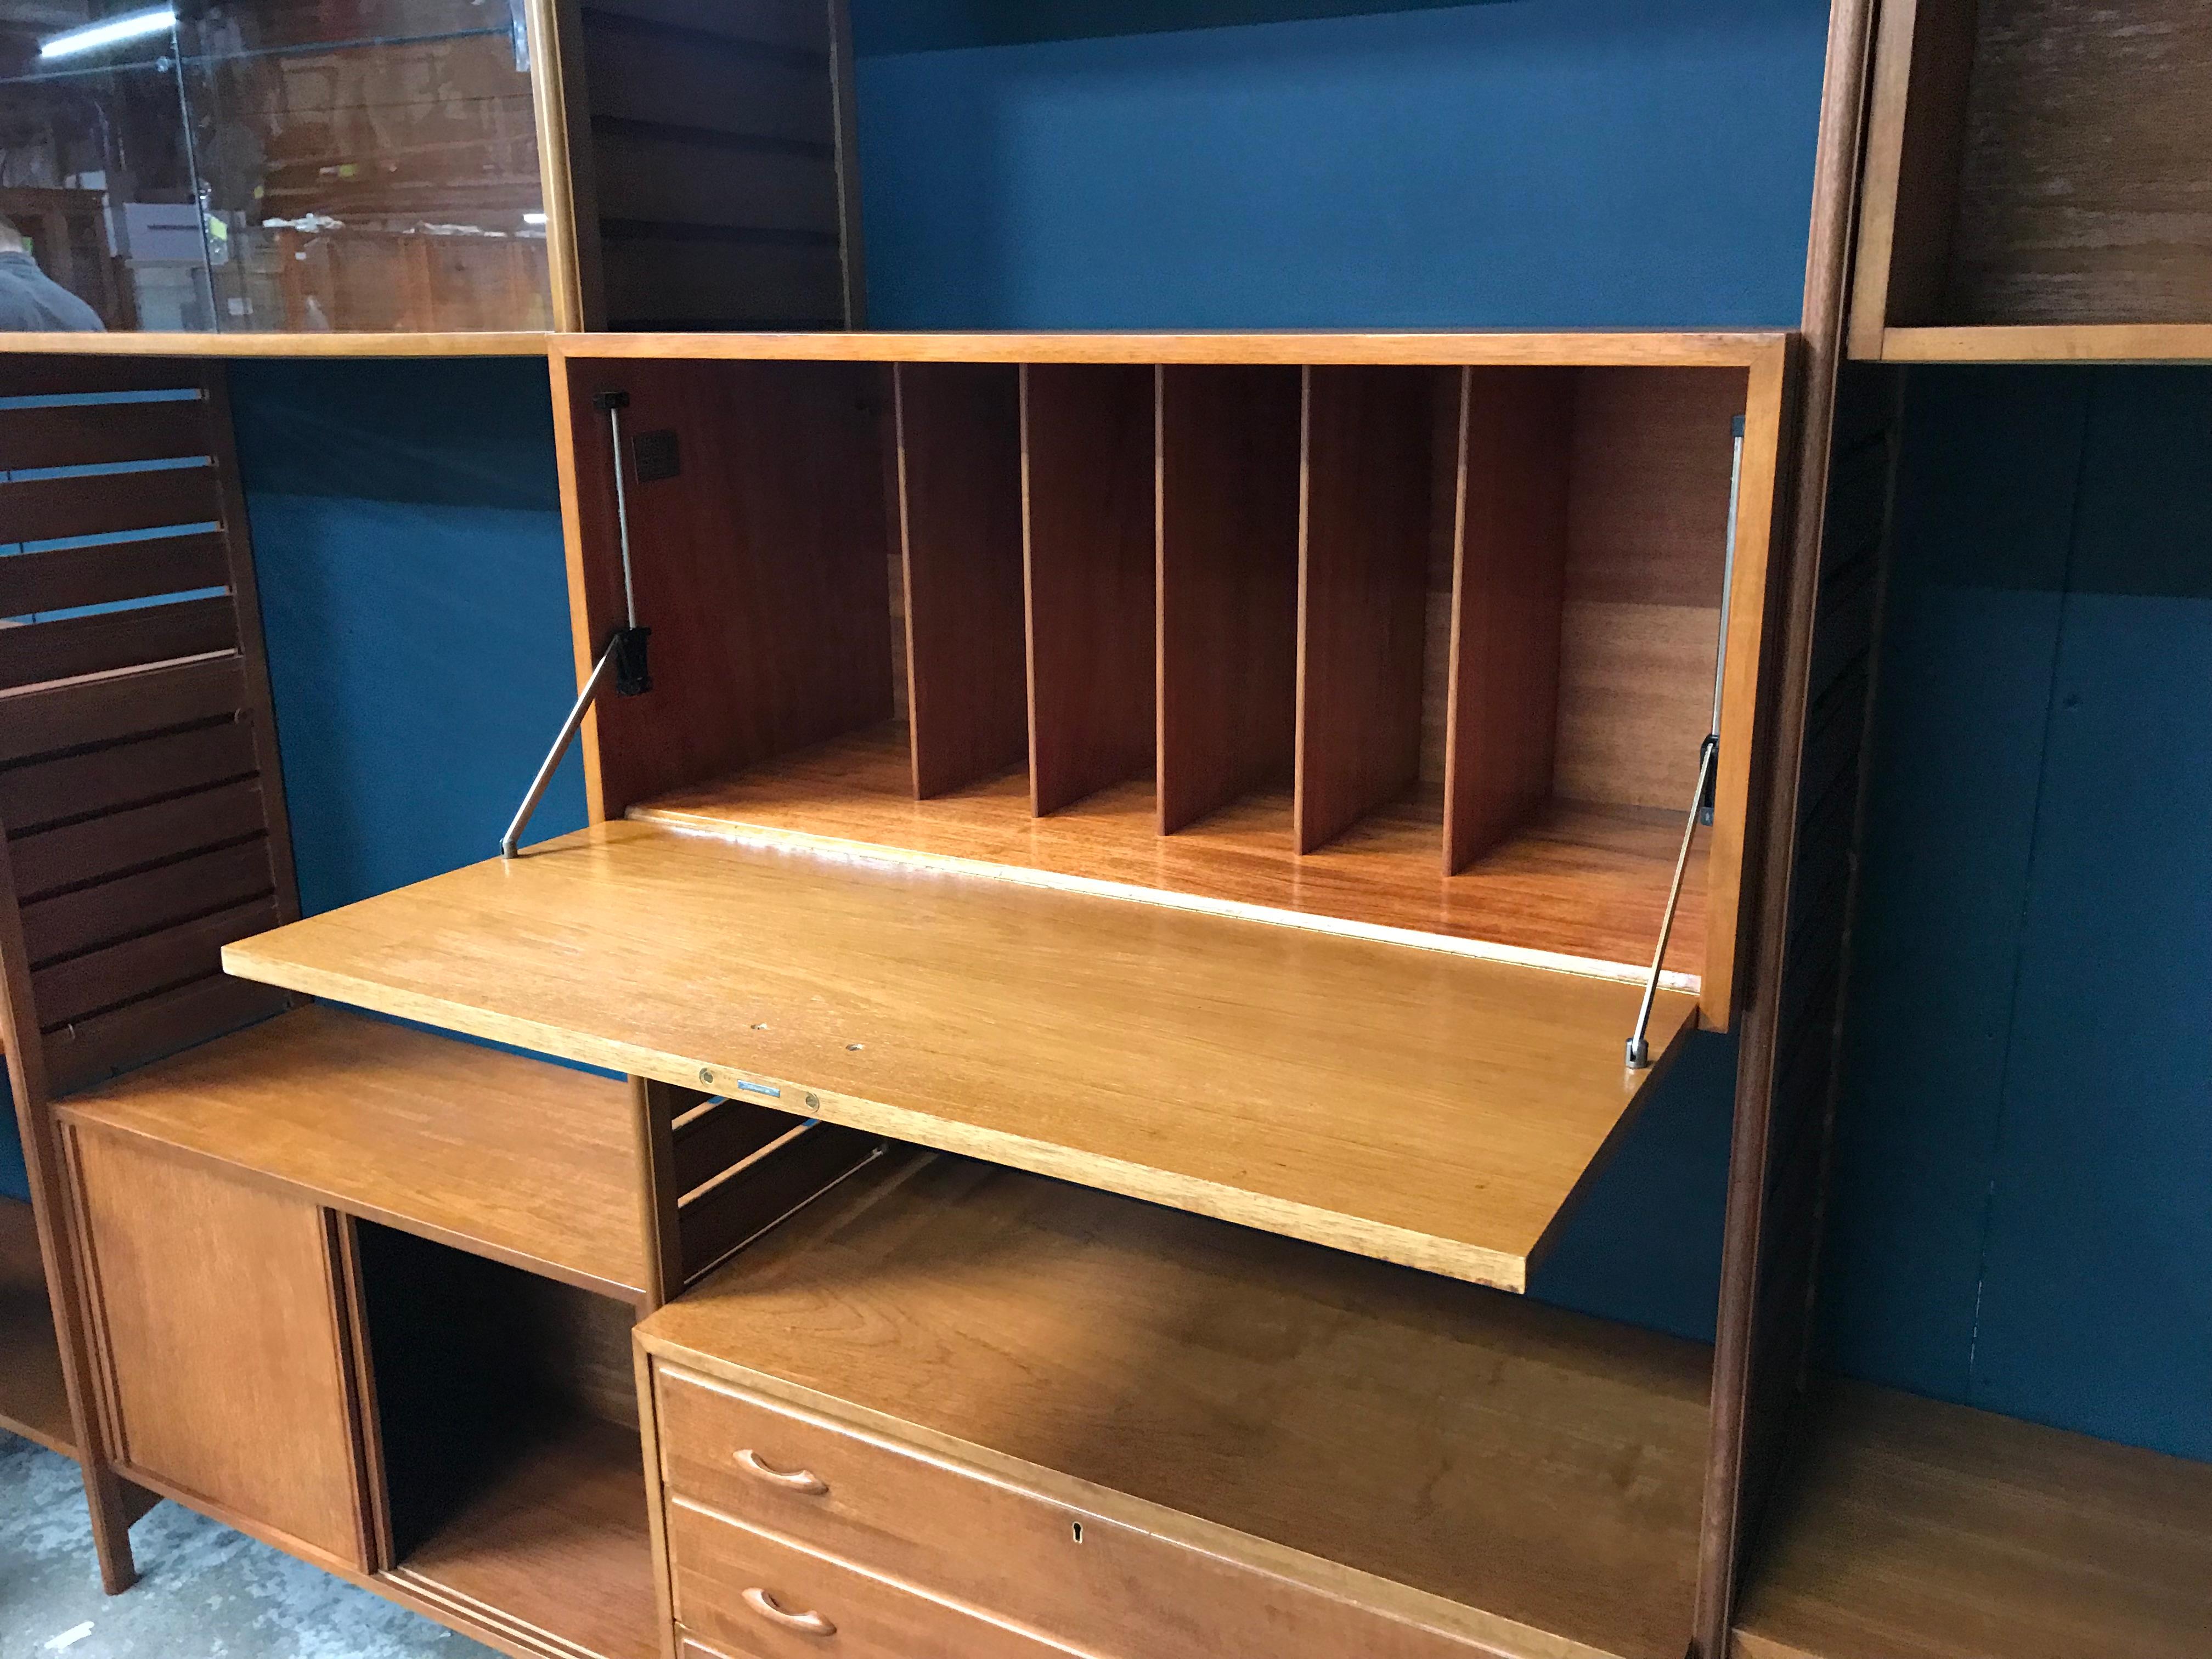 5-Bay Ladderax Teak Midcentury Shelving System by Robert Heal for Staples In Good Condition For Sale In Glasgow, GB